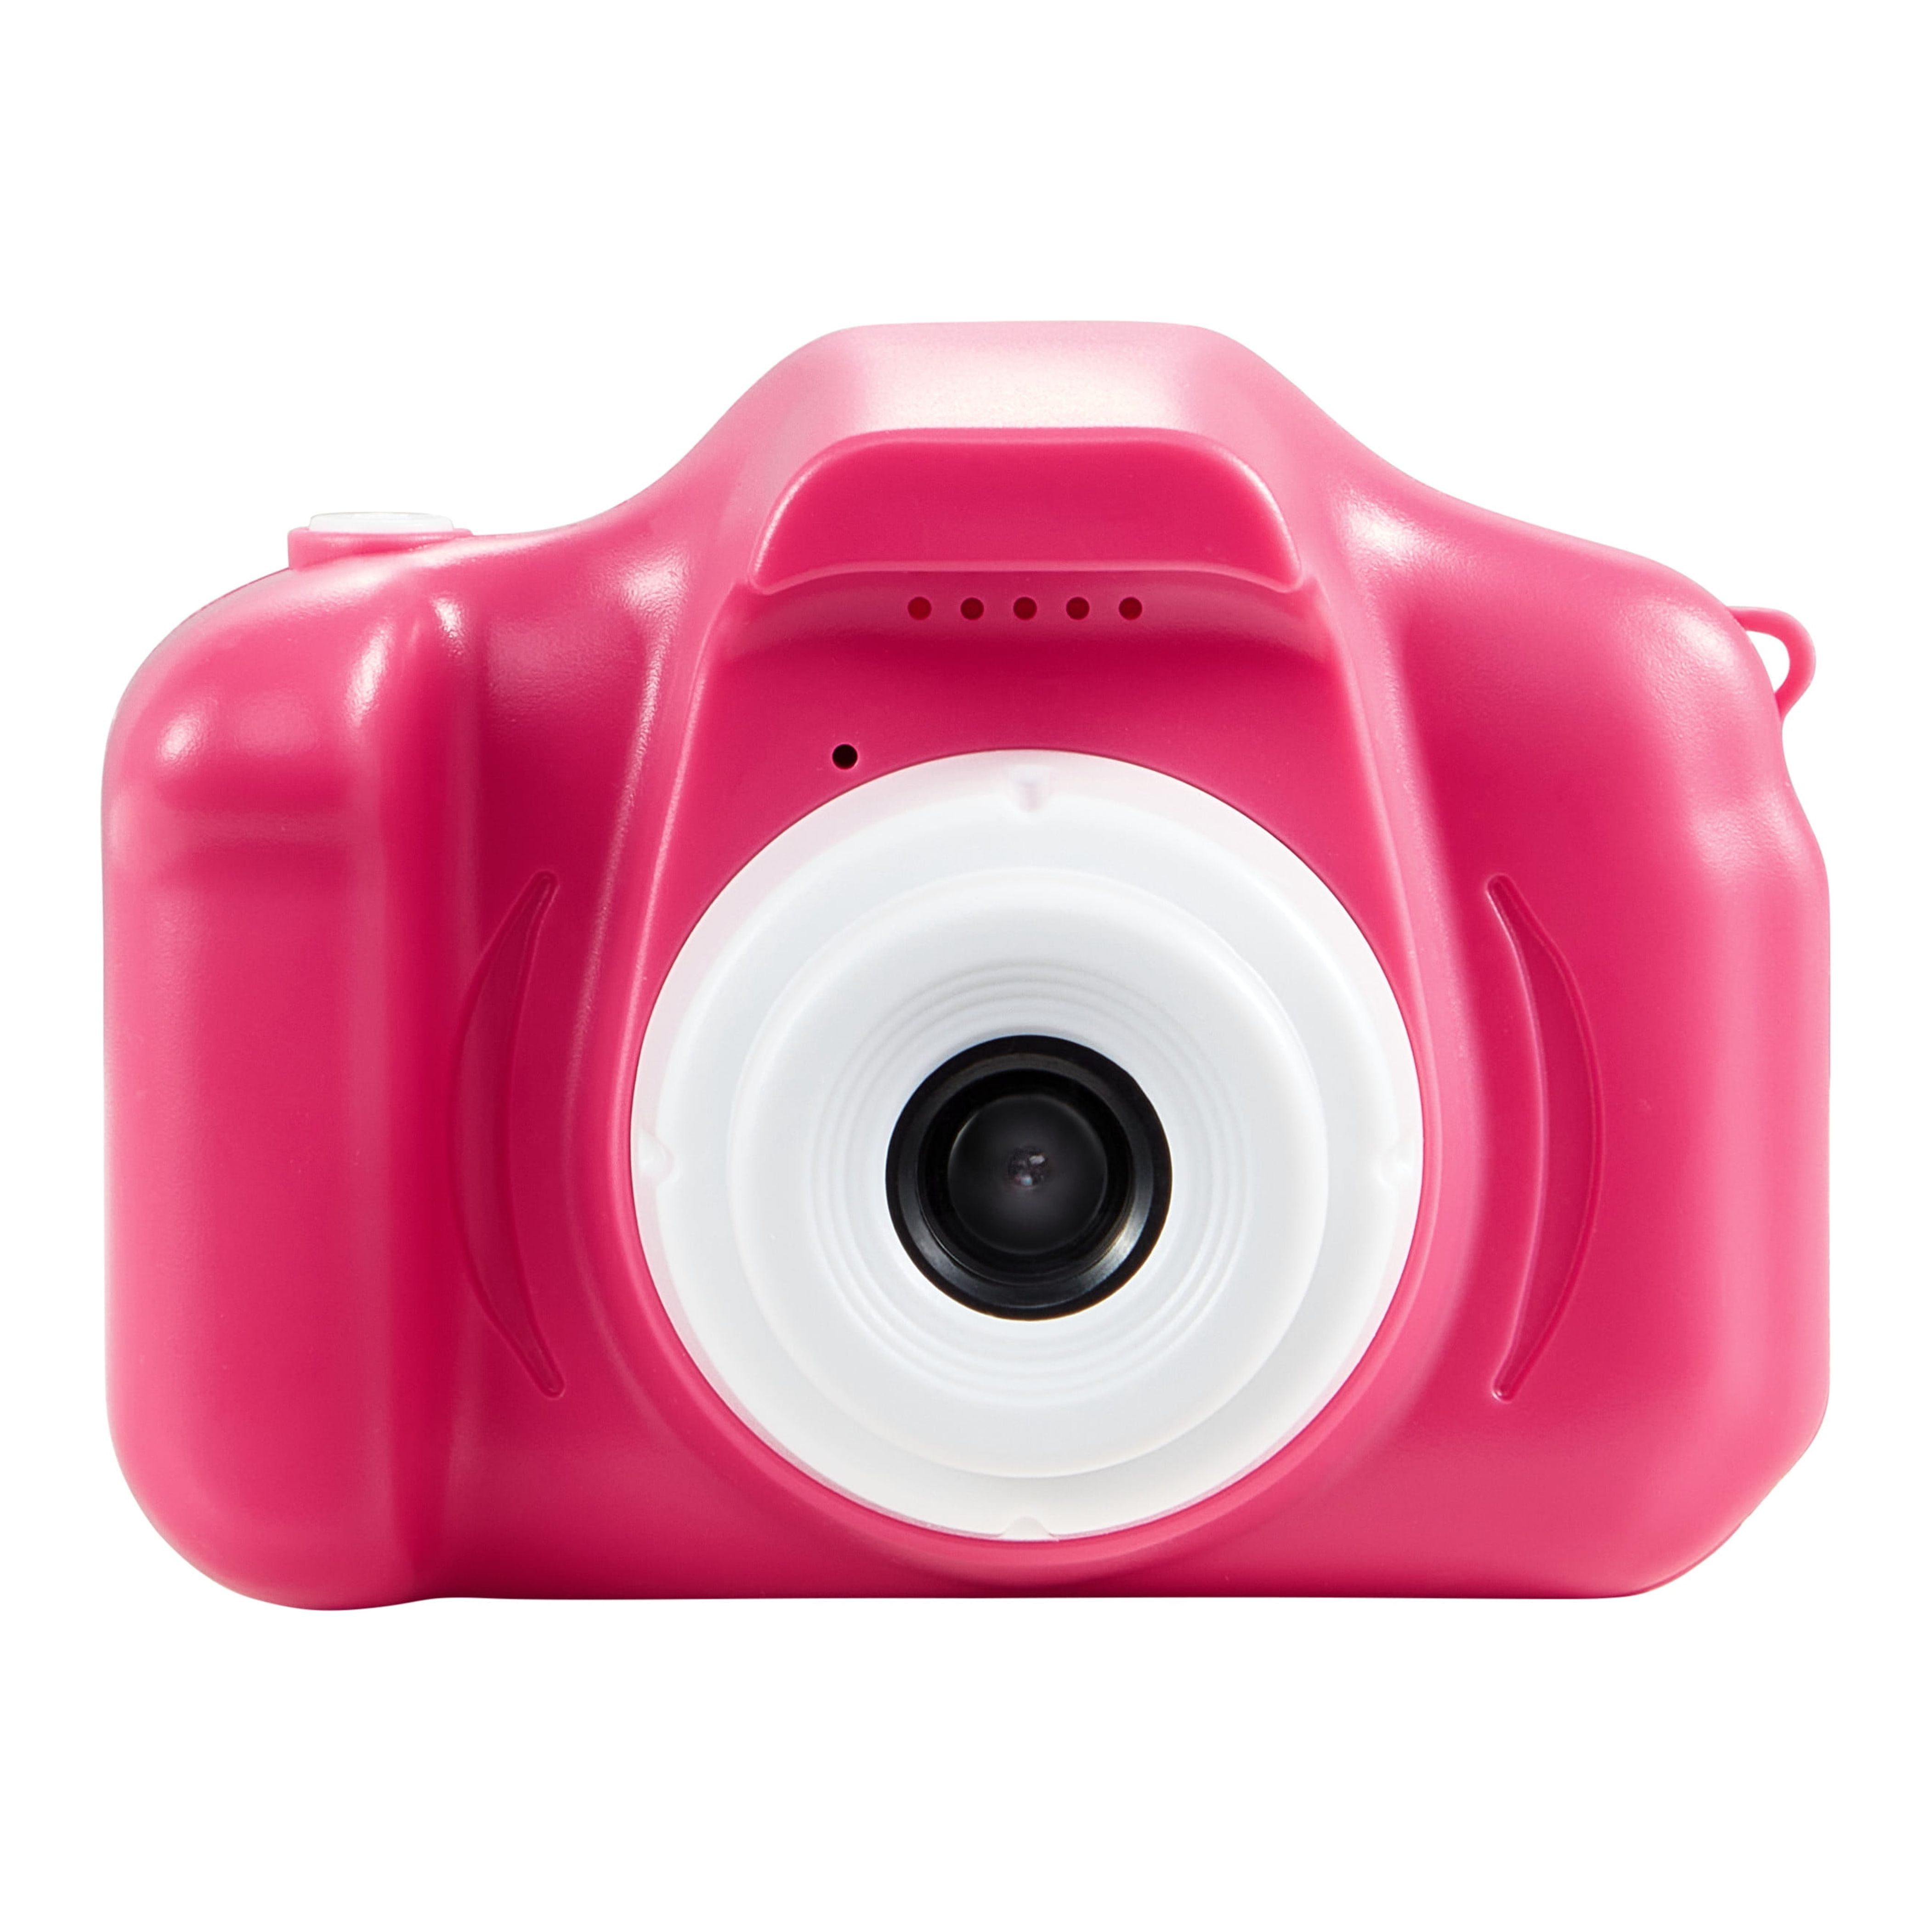 Vivitar Kidzcam Digital Camera for Kids with Rechargeable Battery and 2  Preview Screen, Pink